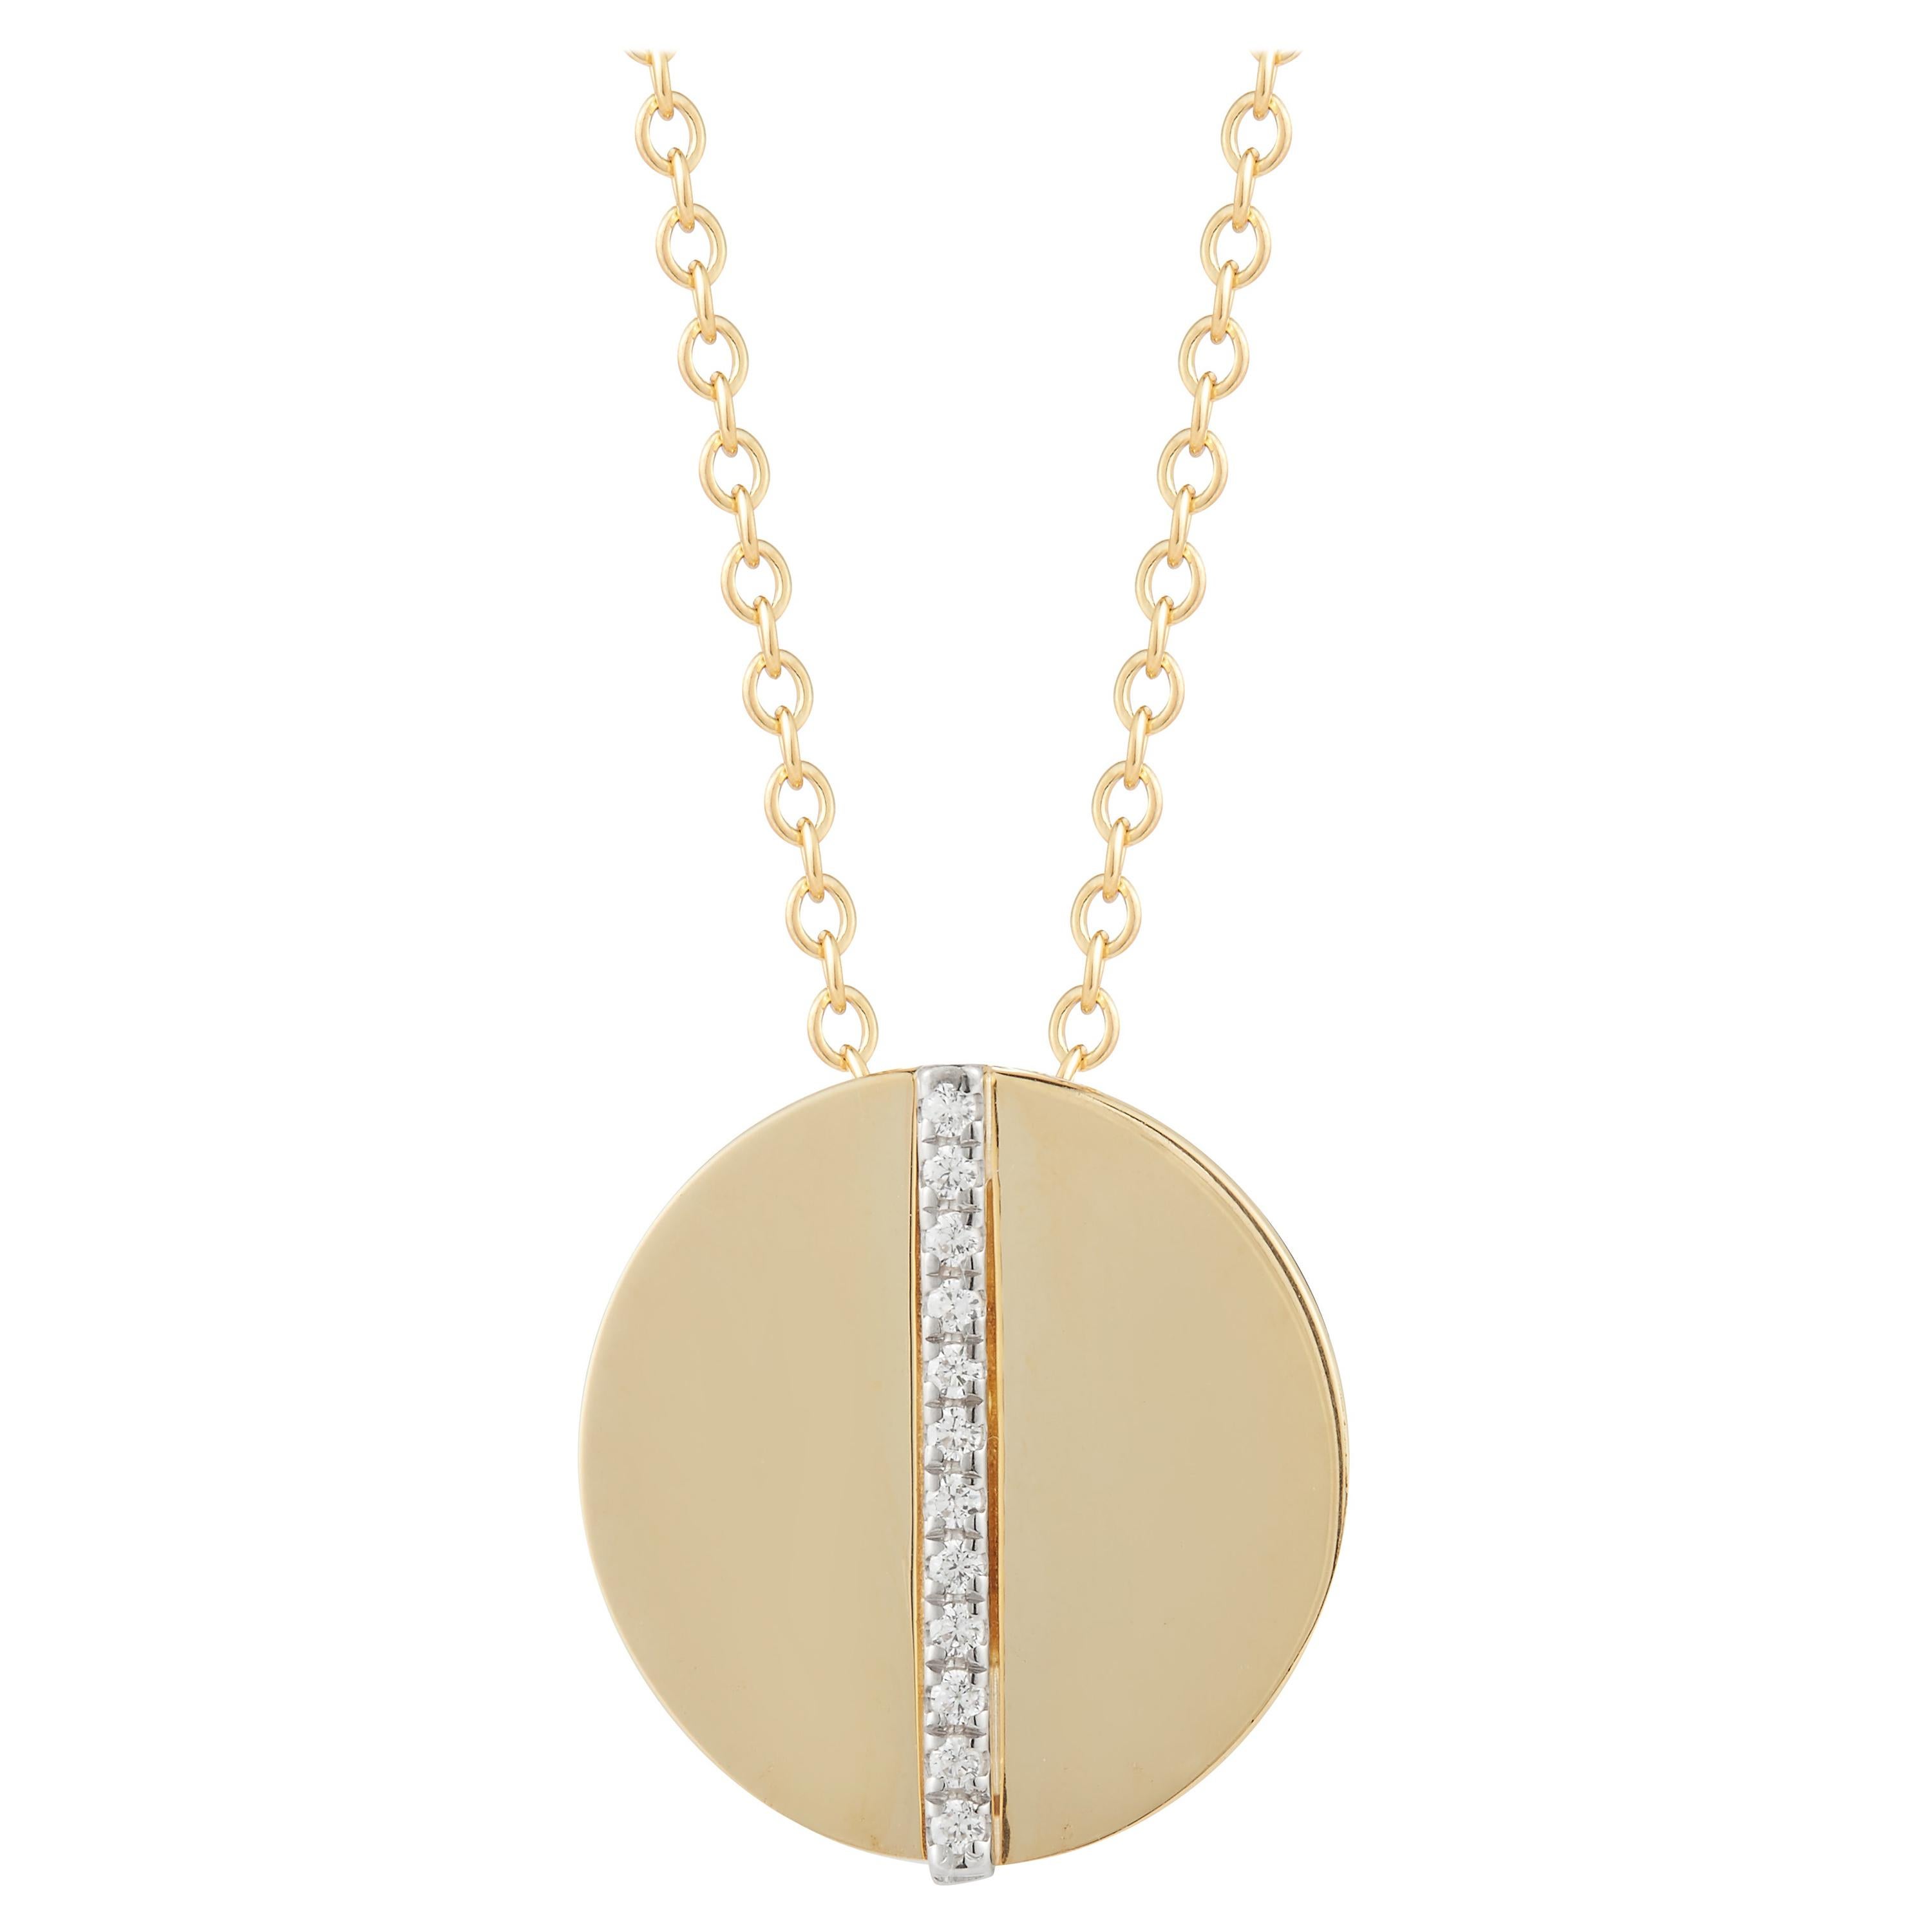 Hand-Crafted 14 Karat Yellow Gold Dainty Round-Shaped Pendant